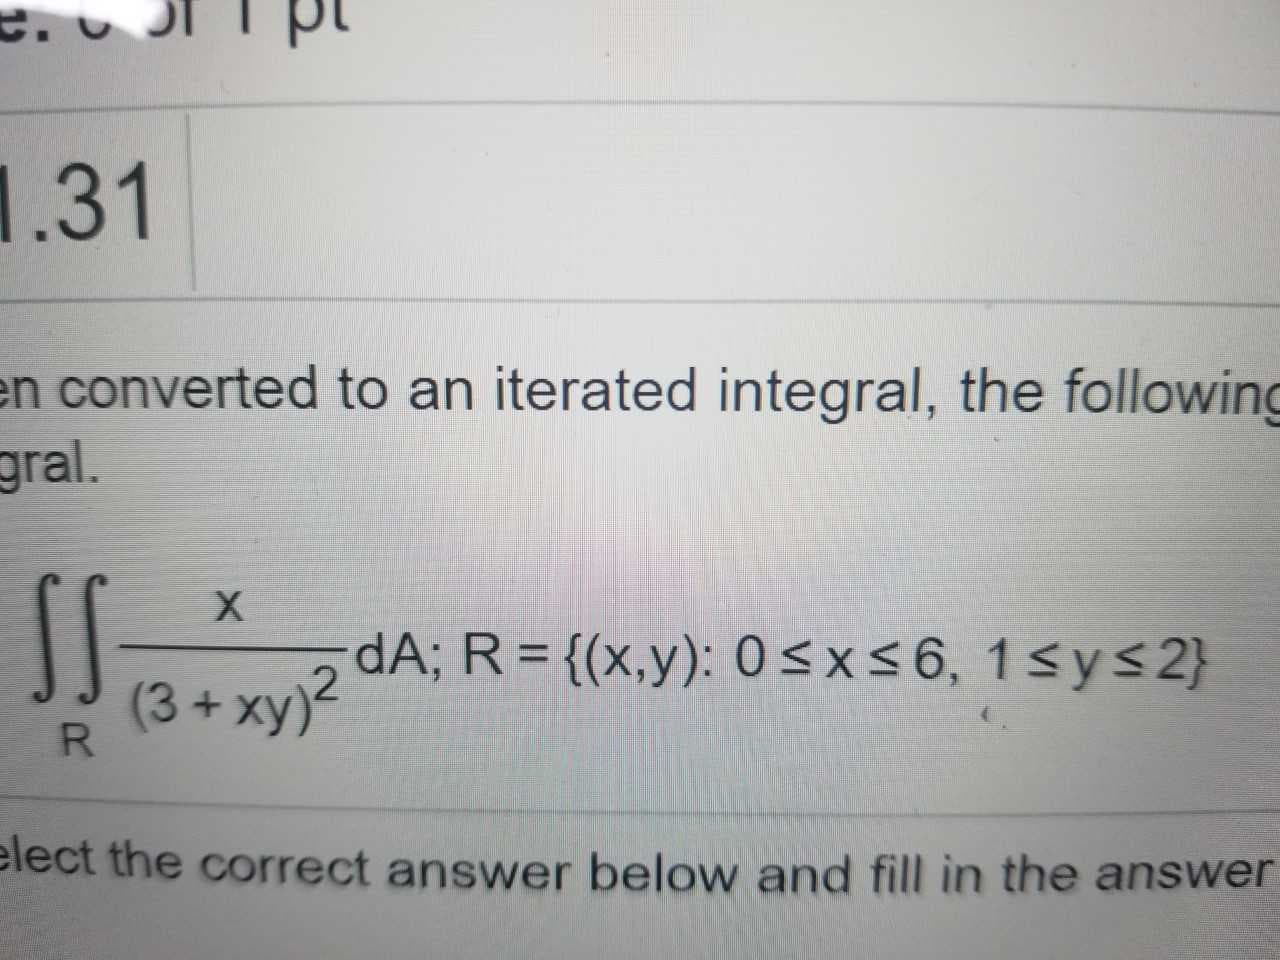 31
n converted to an iterated integral, the following
gral.
(3+xy)2 dA; R = {(x,y): 0
6, 1 sy
2)
x
lect the correct answer below and fill in the answer
